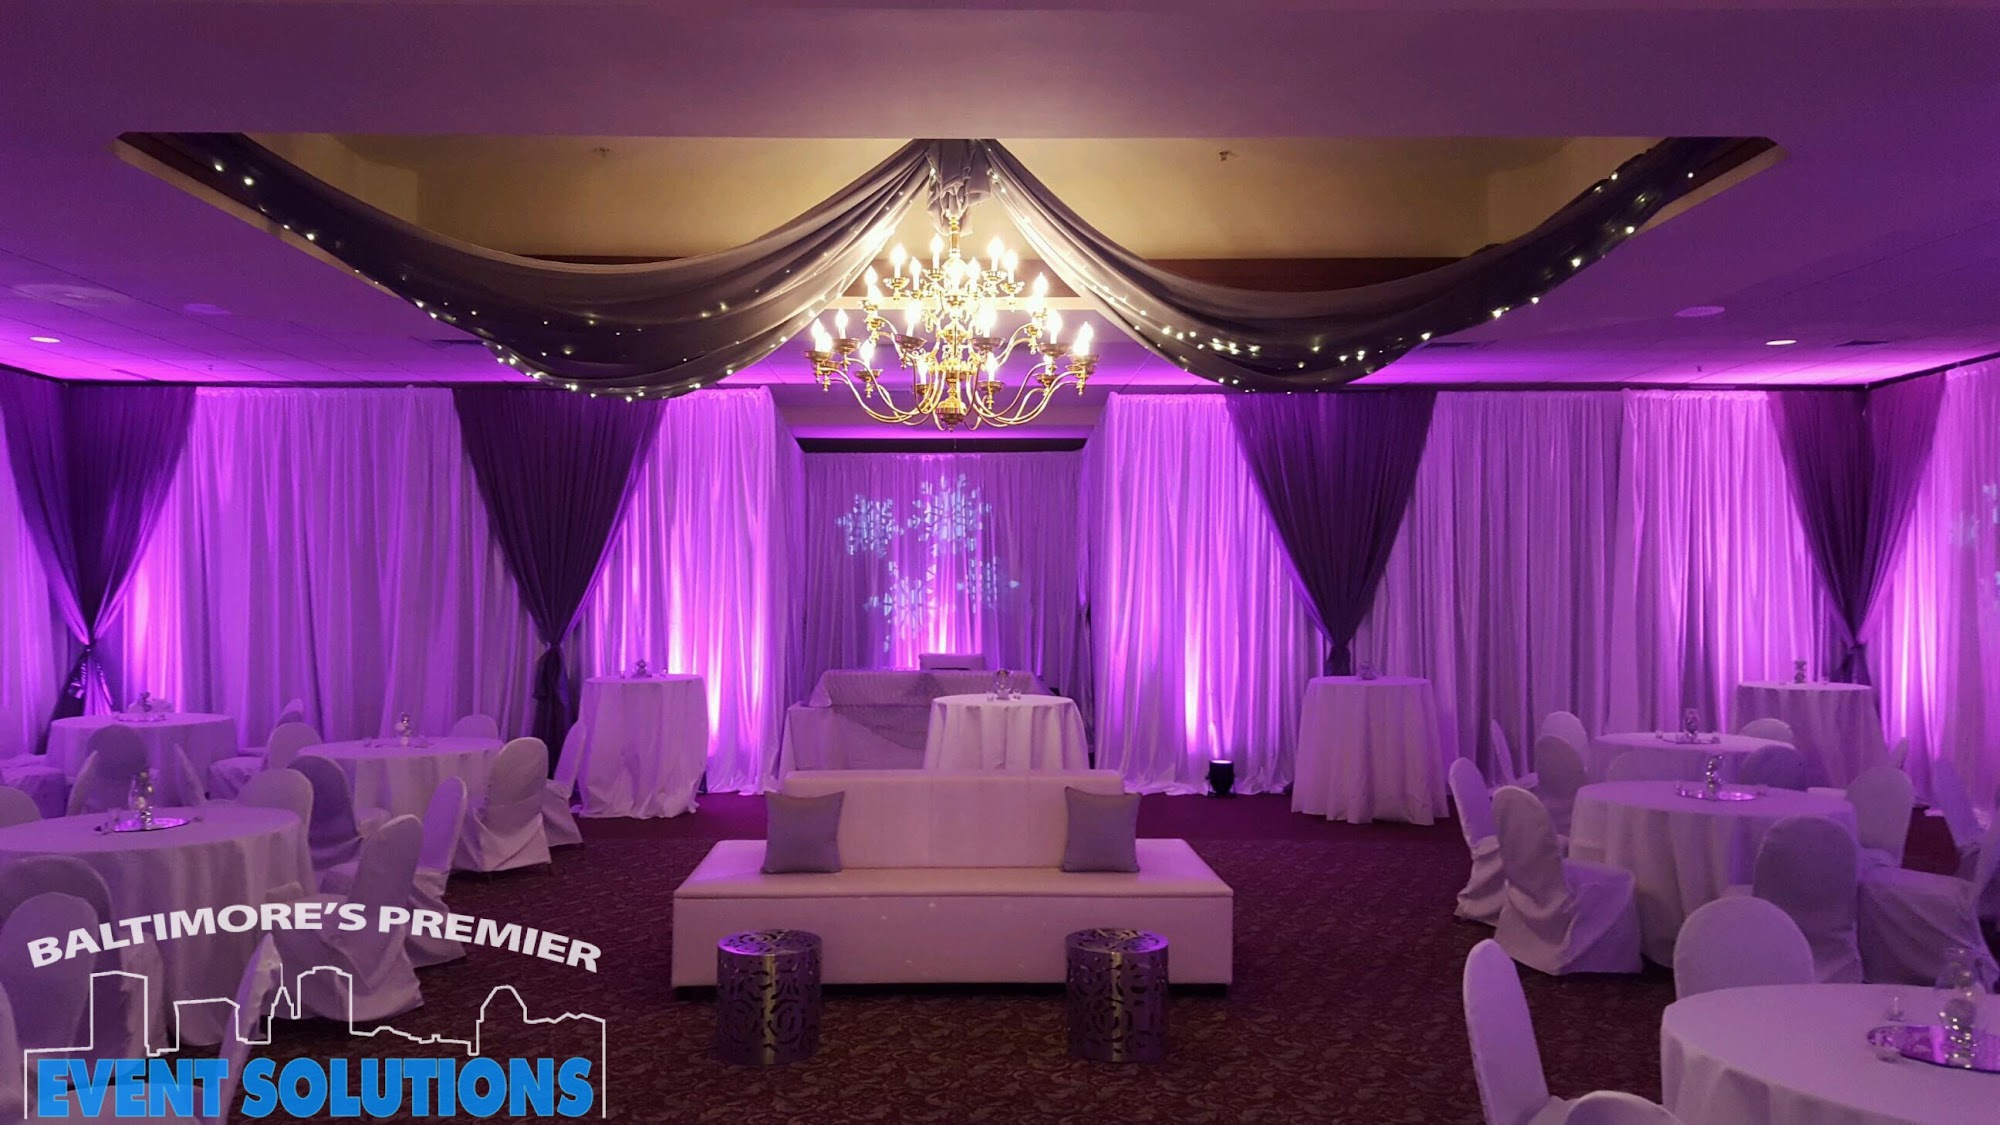 Baltimore's Premier Event Solutions 7008 Golden Ring Rd, Rosedale Maryland 21237